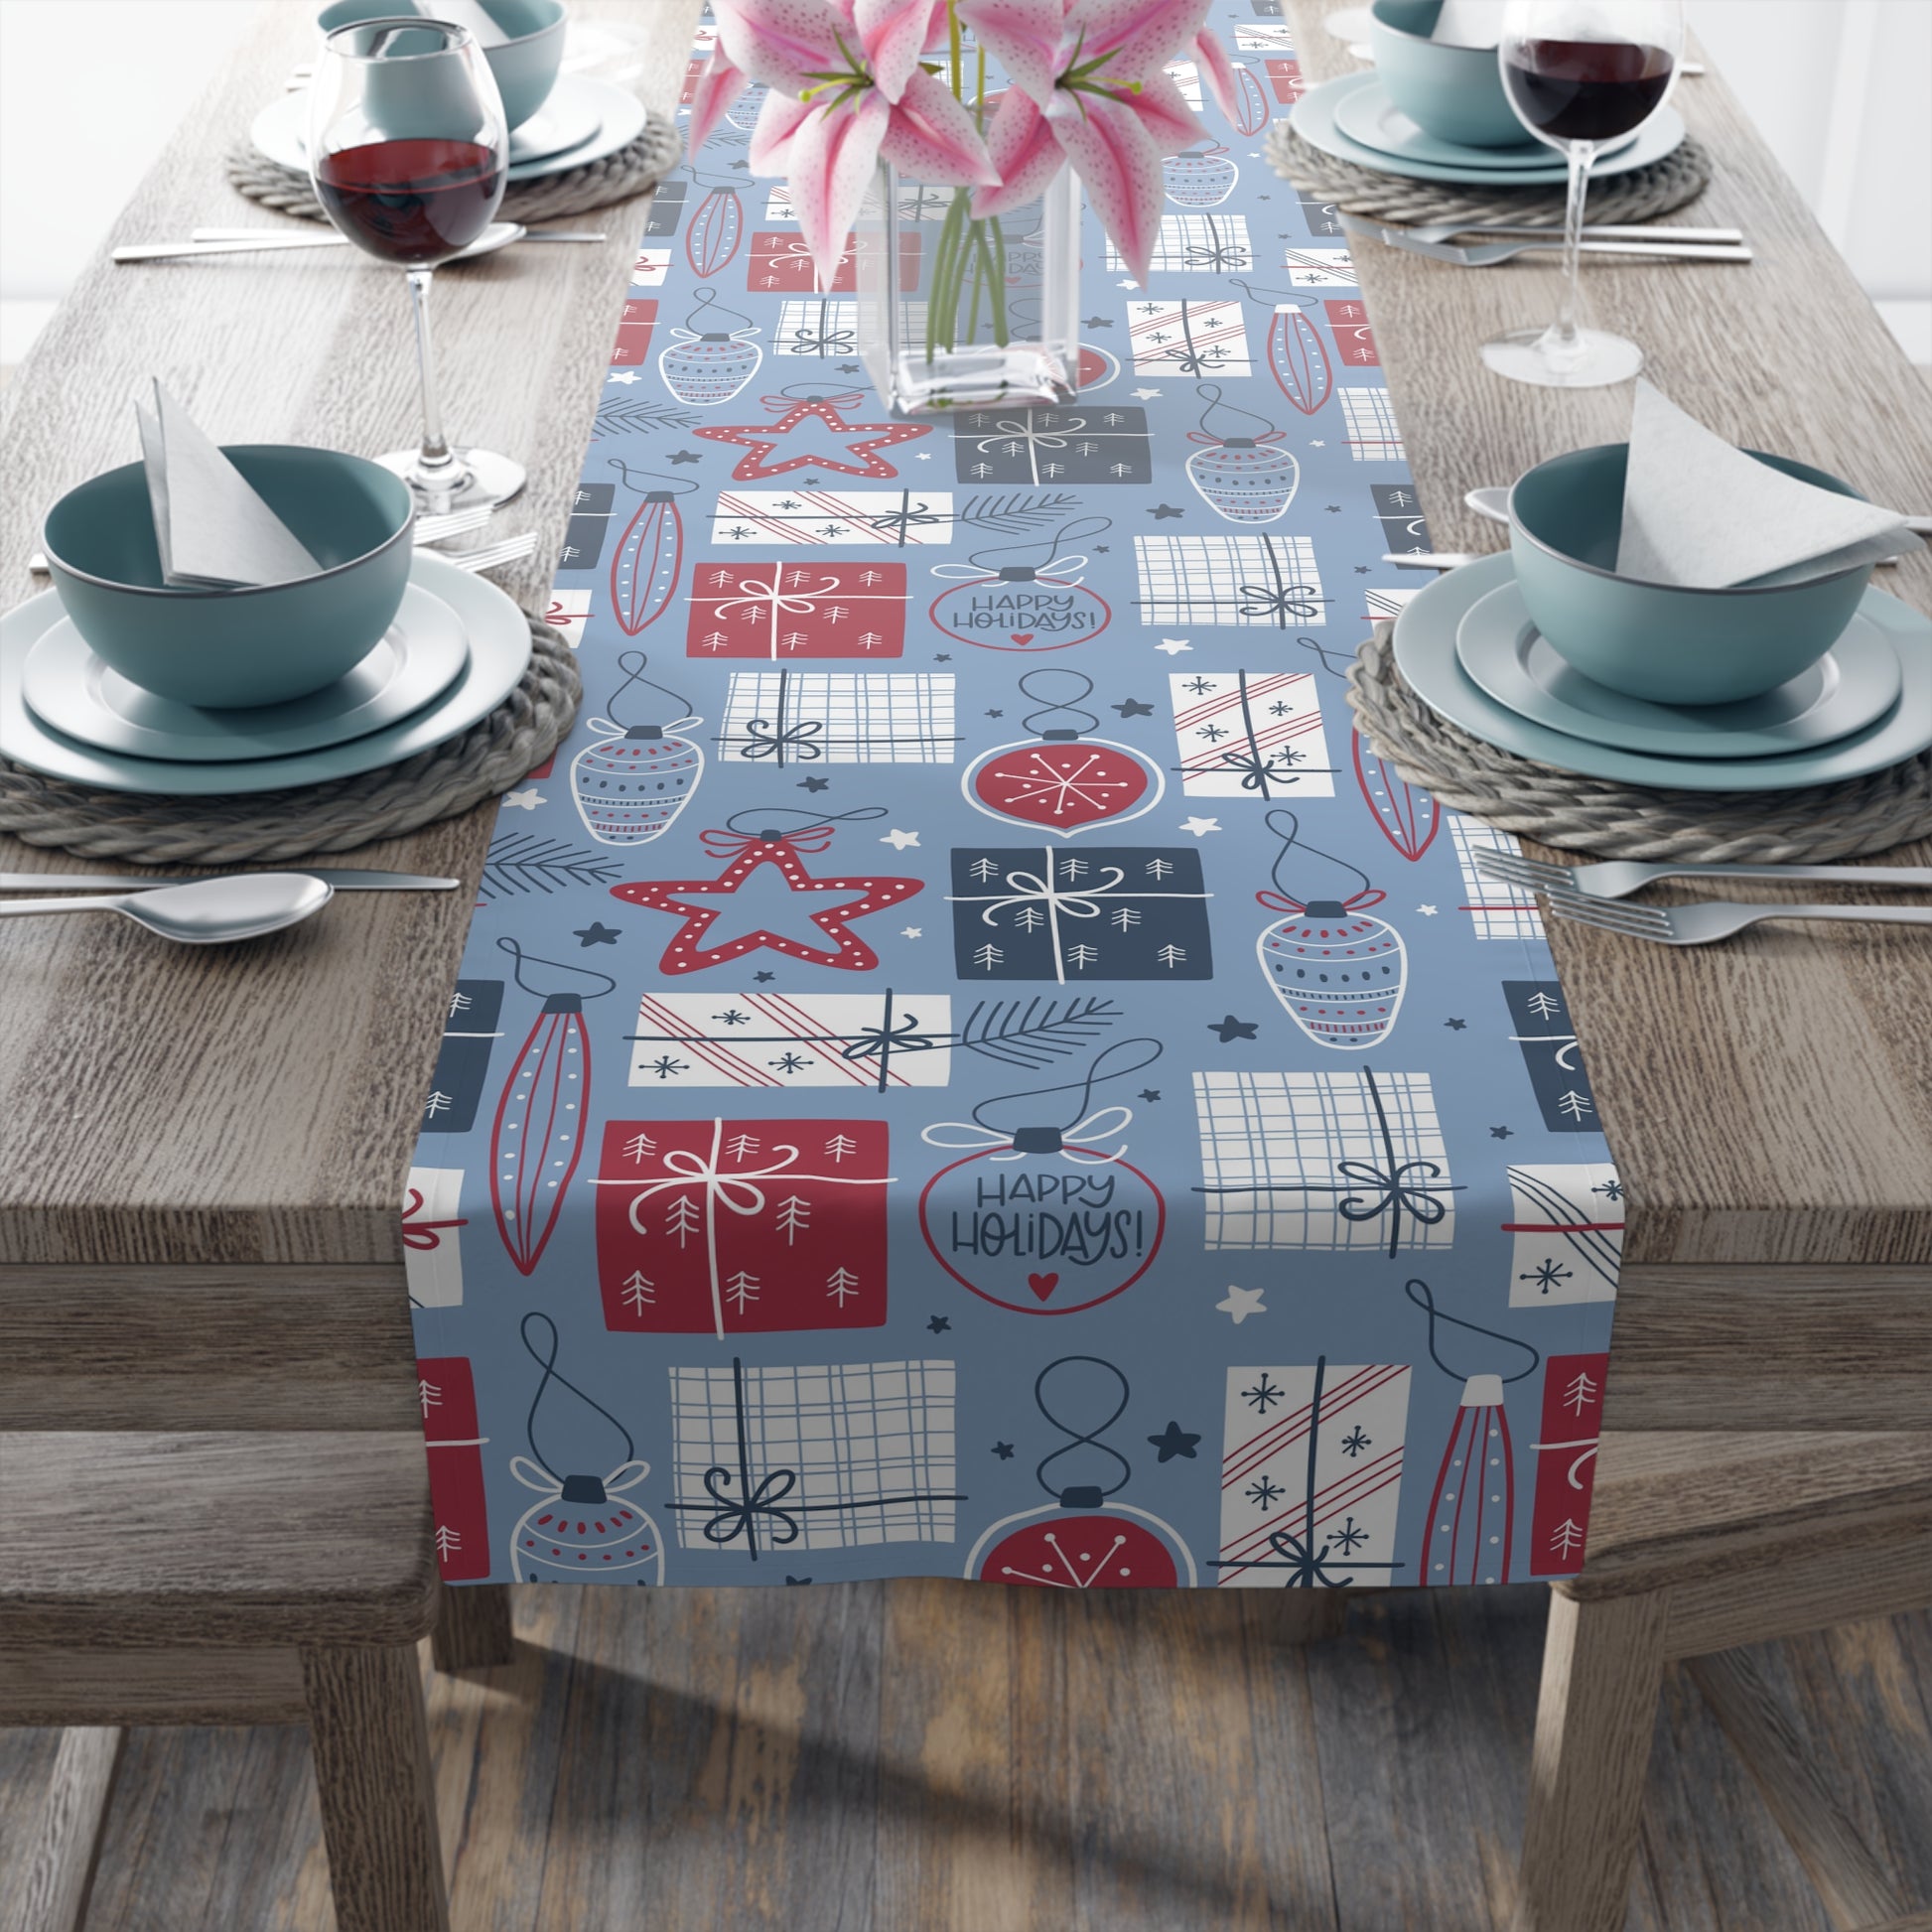 blue christmas table runner with christmas bulbs, lights, presents and star print in red, navy blue and white colors